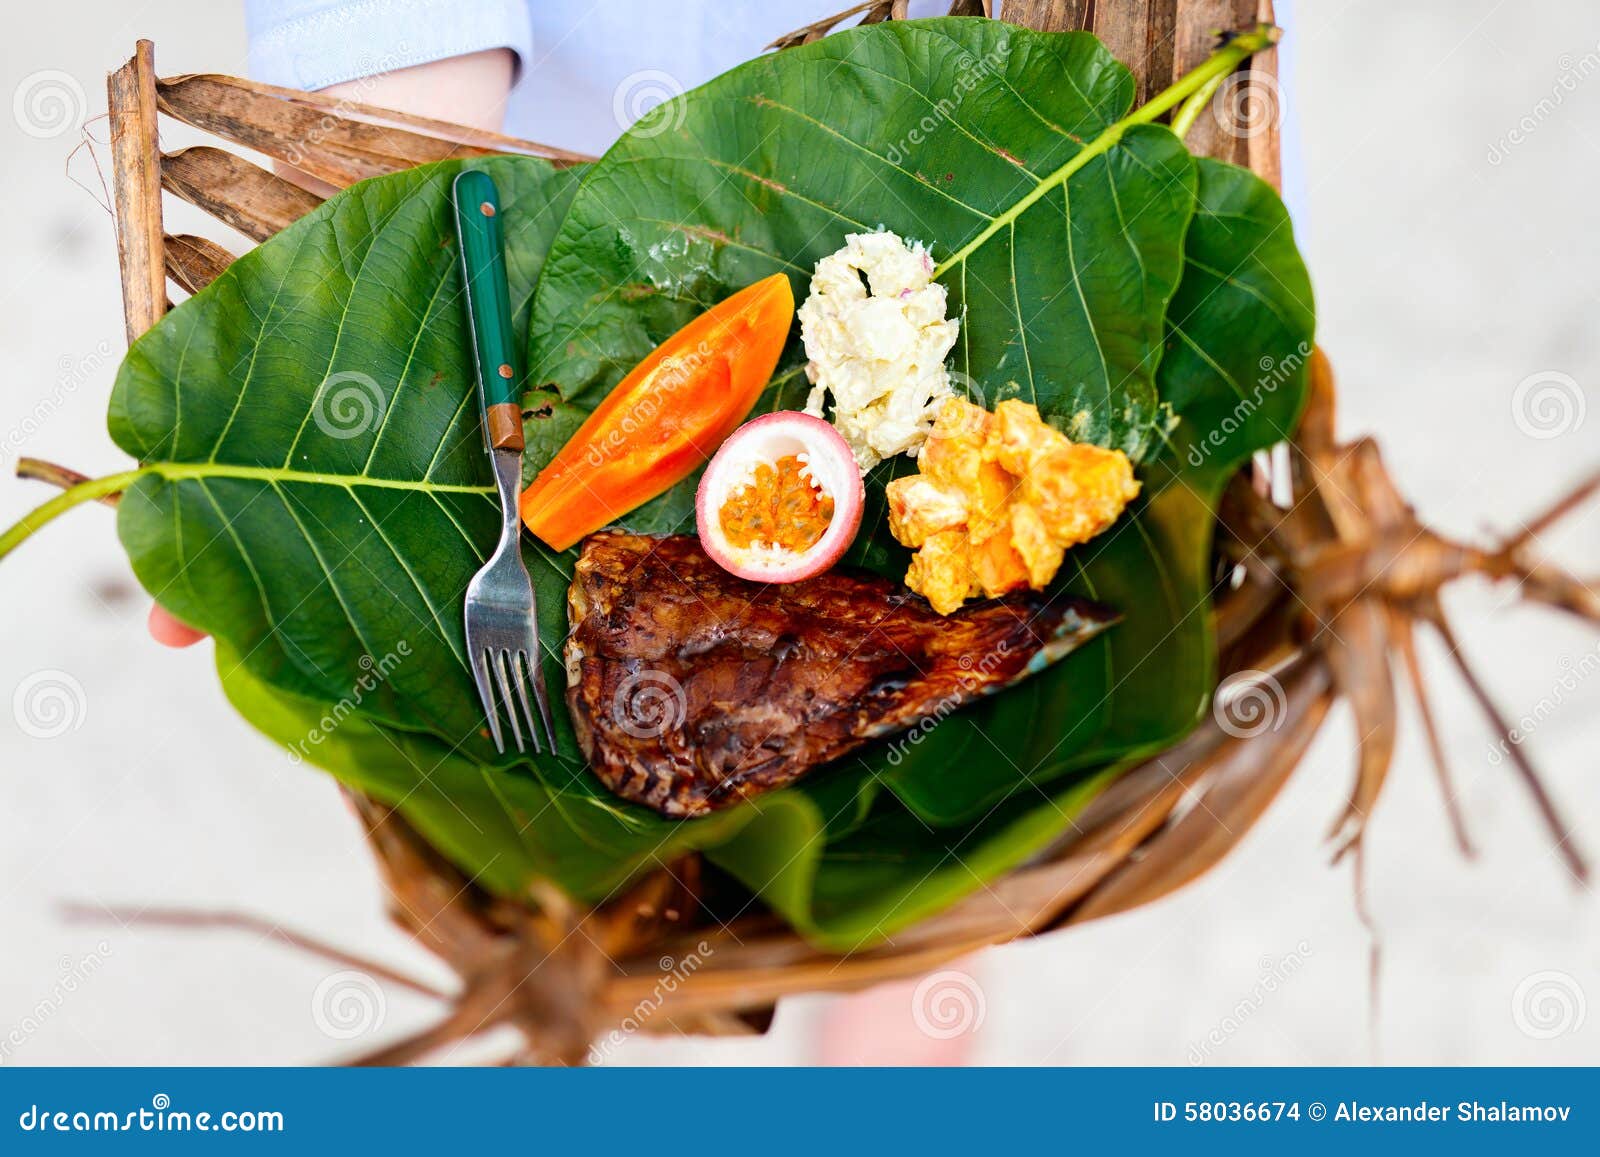 local-south-pacific-food-close-up-some-origin-weaved-platter-58036674.jpg